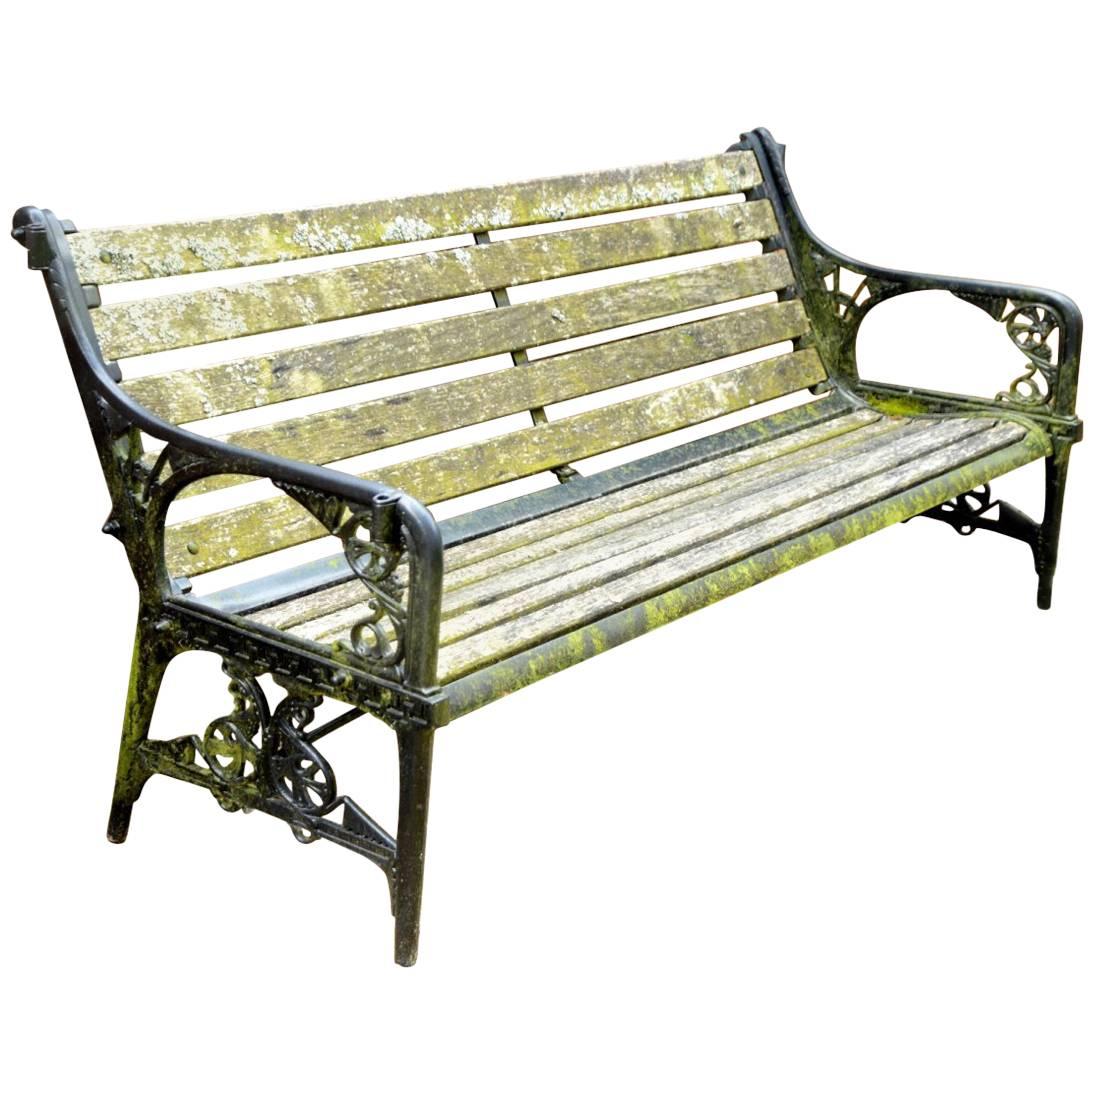 C Dresser for Colebrookdale Aesthetic Movement Cast Iron Garden Canopy Seat Ends